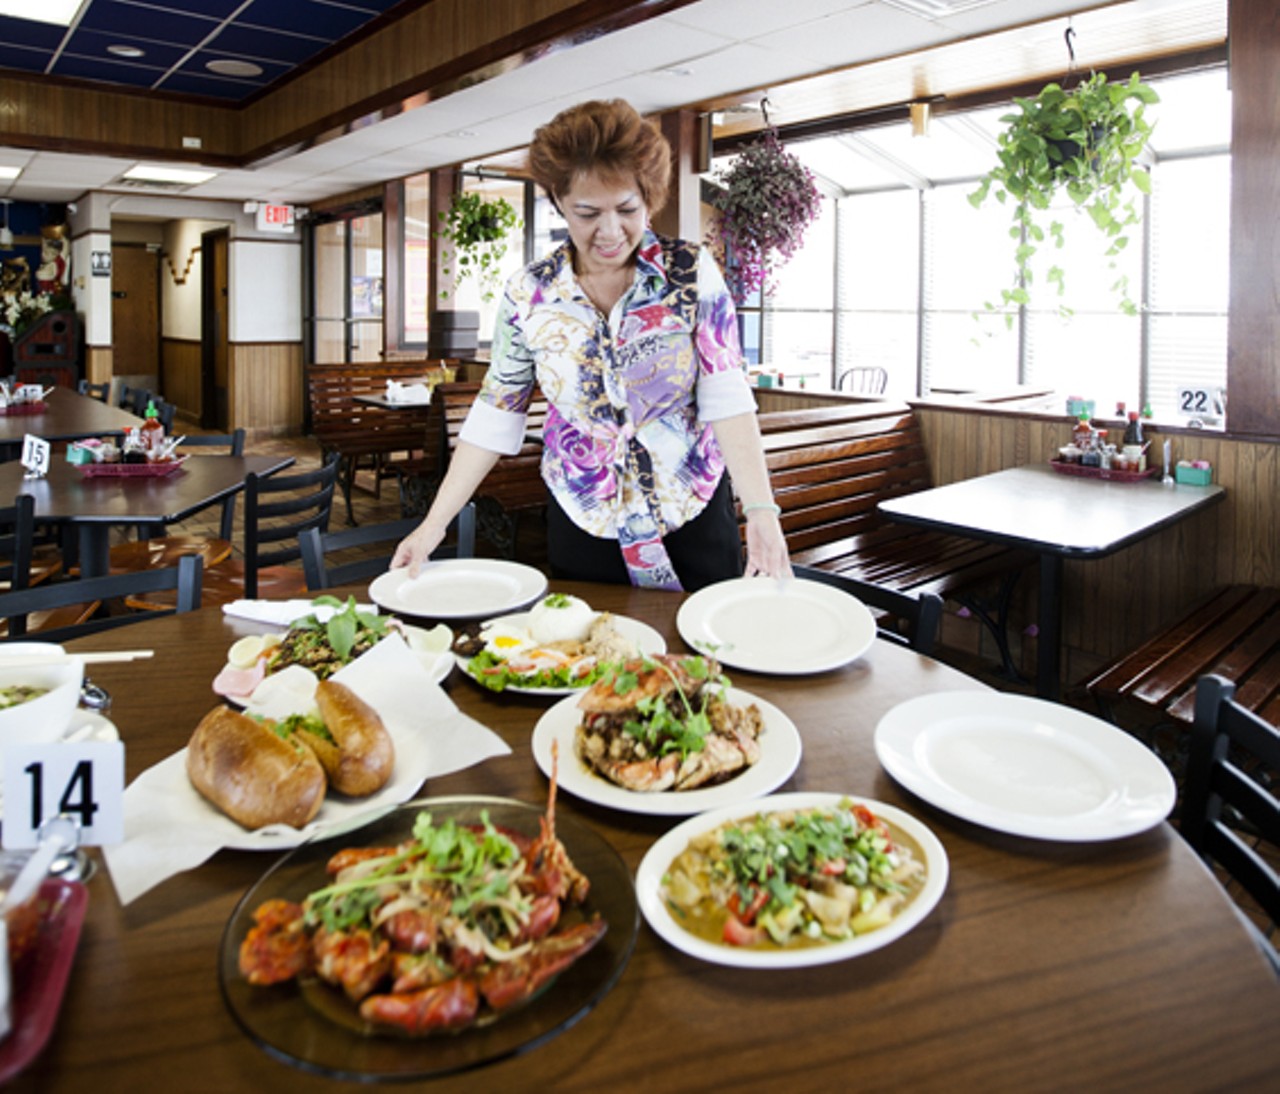 Owner Lyn Chieng setting a table.